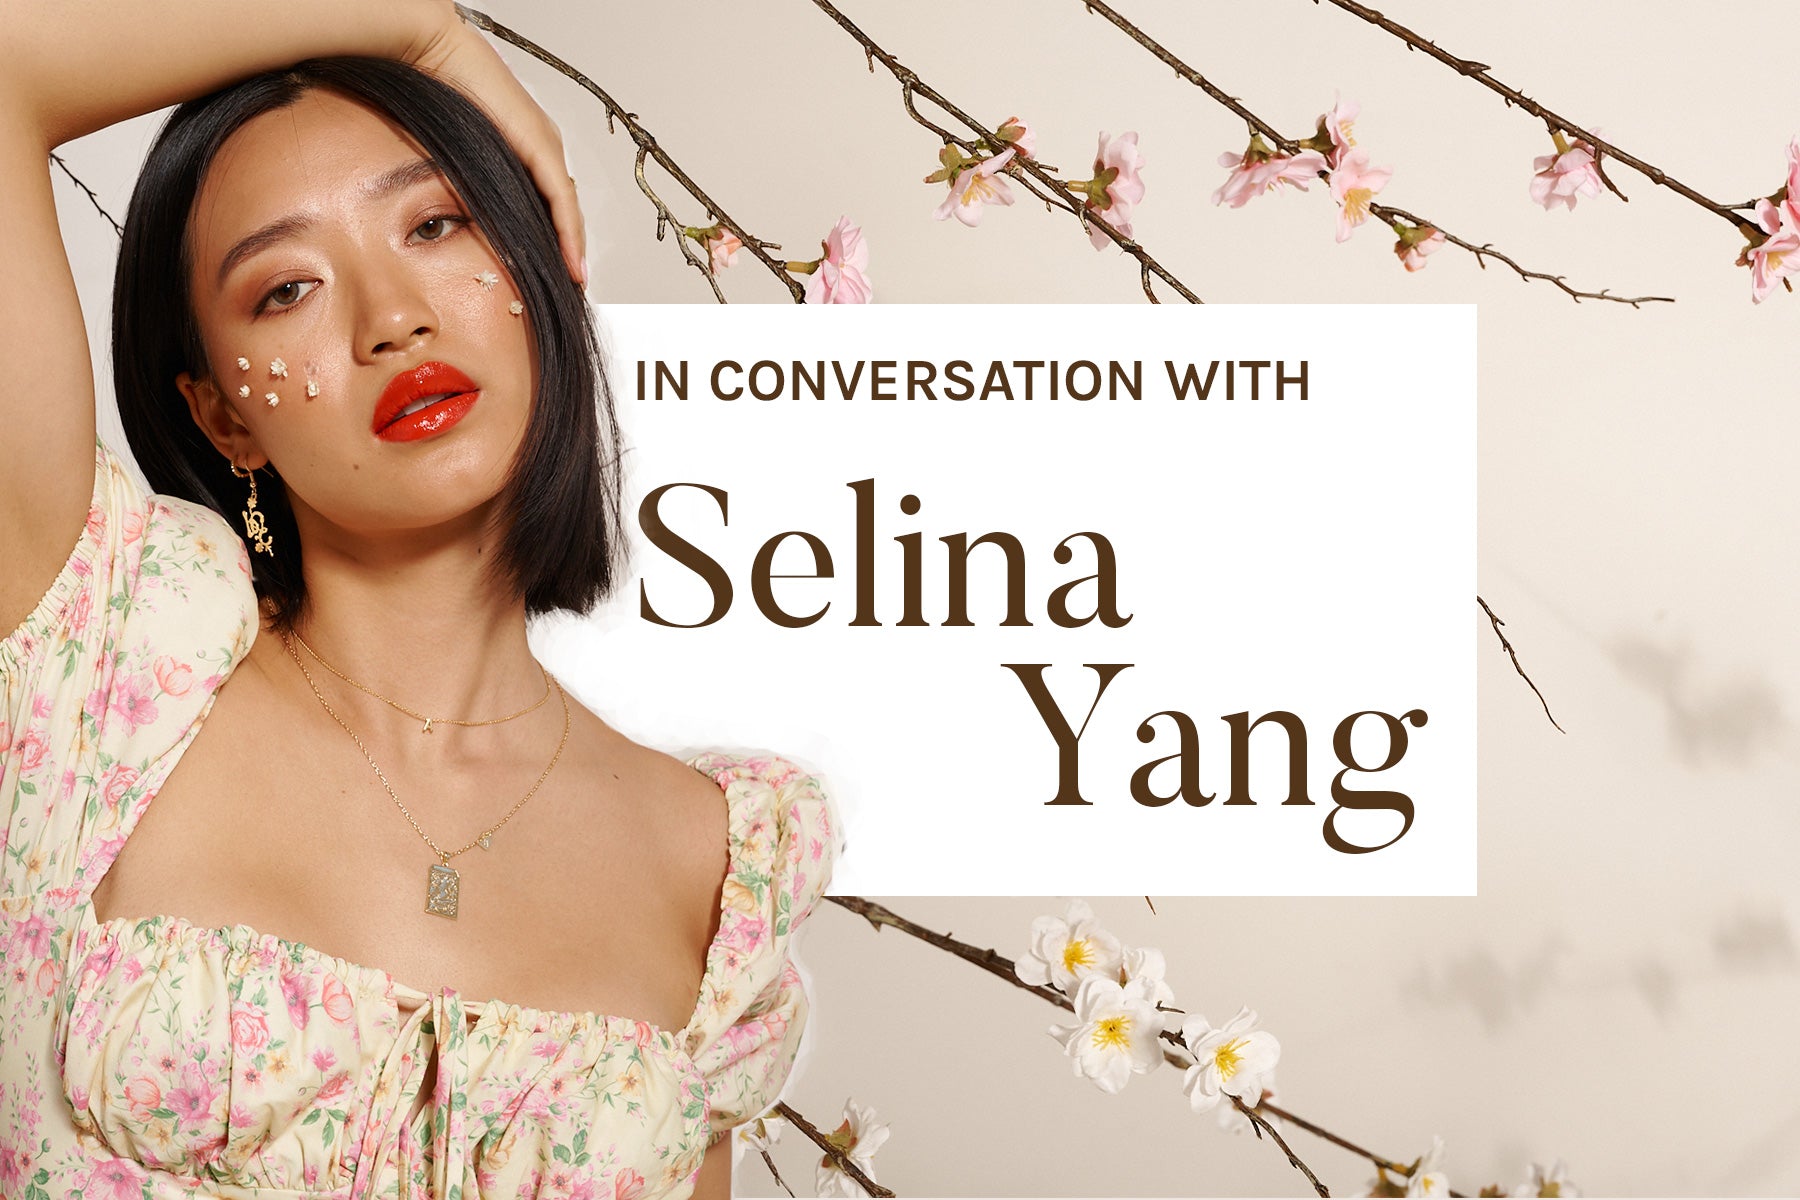 In Conversation With - Selina Yang